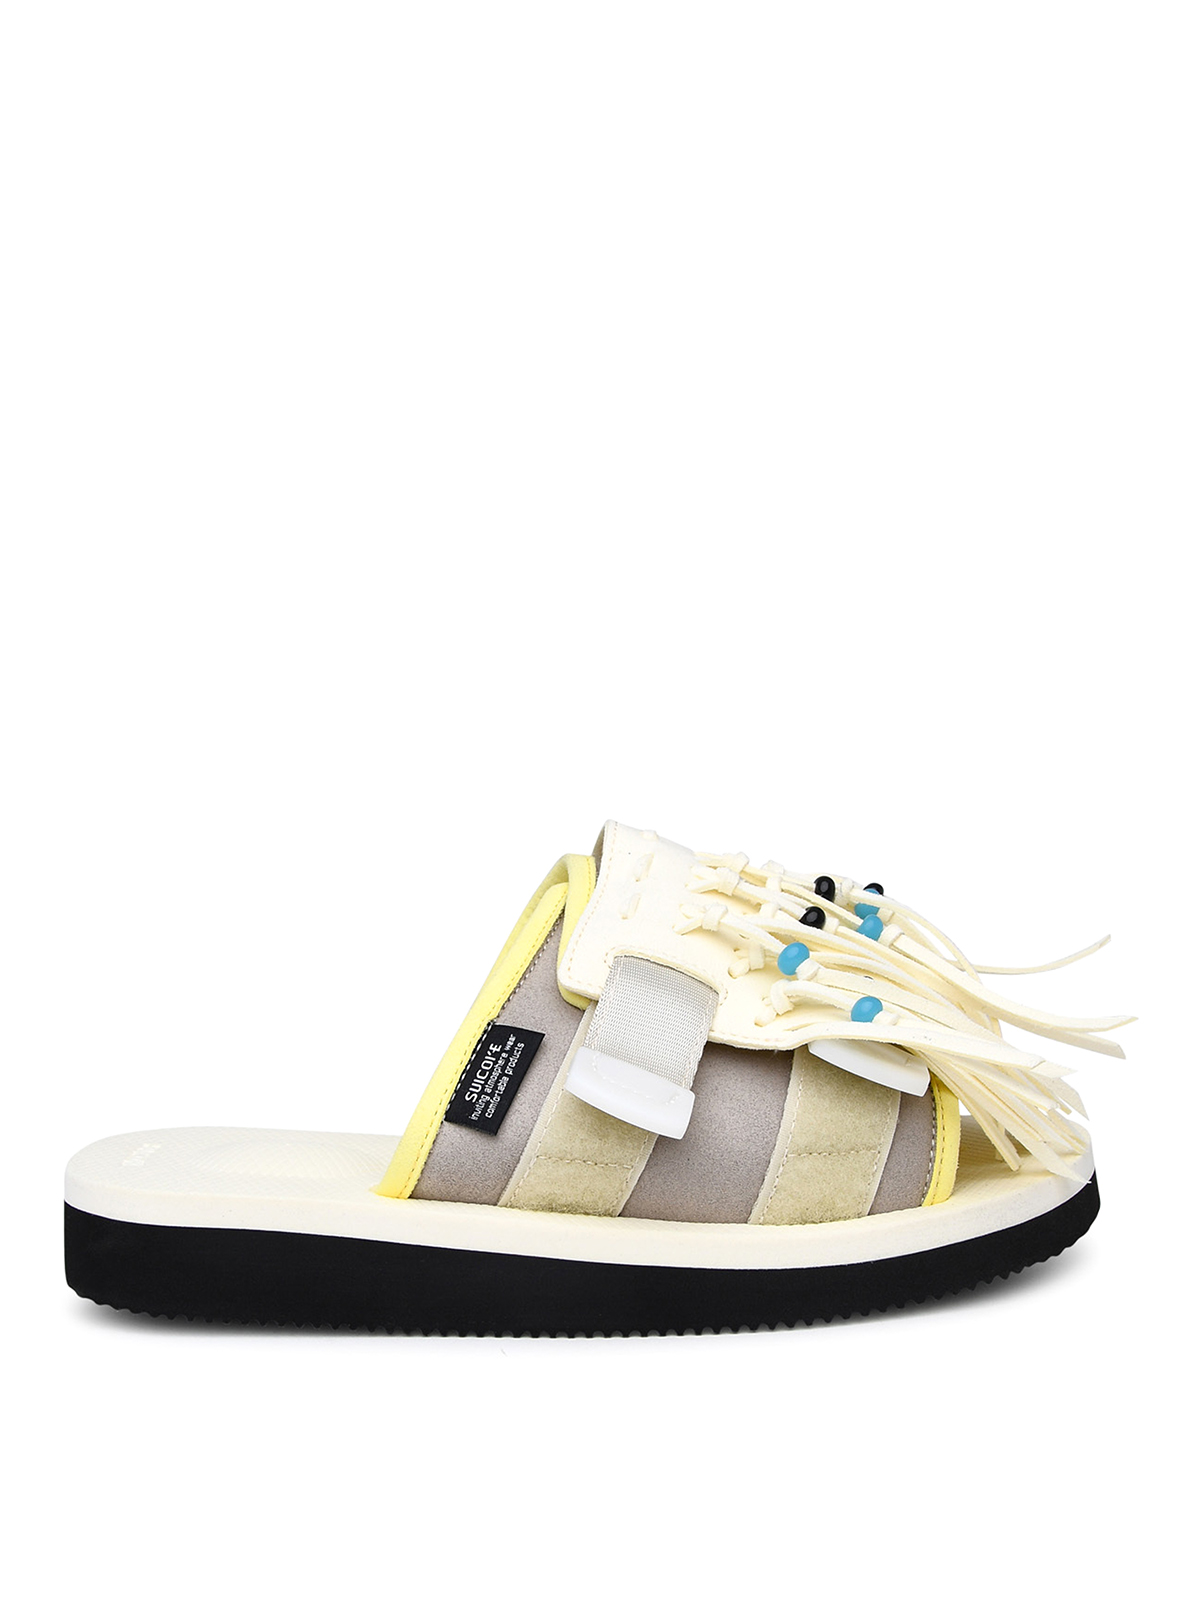 Shop Suicoke Hoto Cab Slipper In Ivory Synthetic Leather In Light Yellow